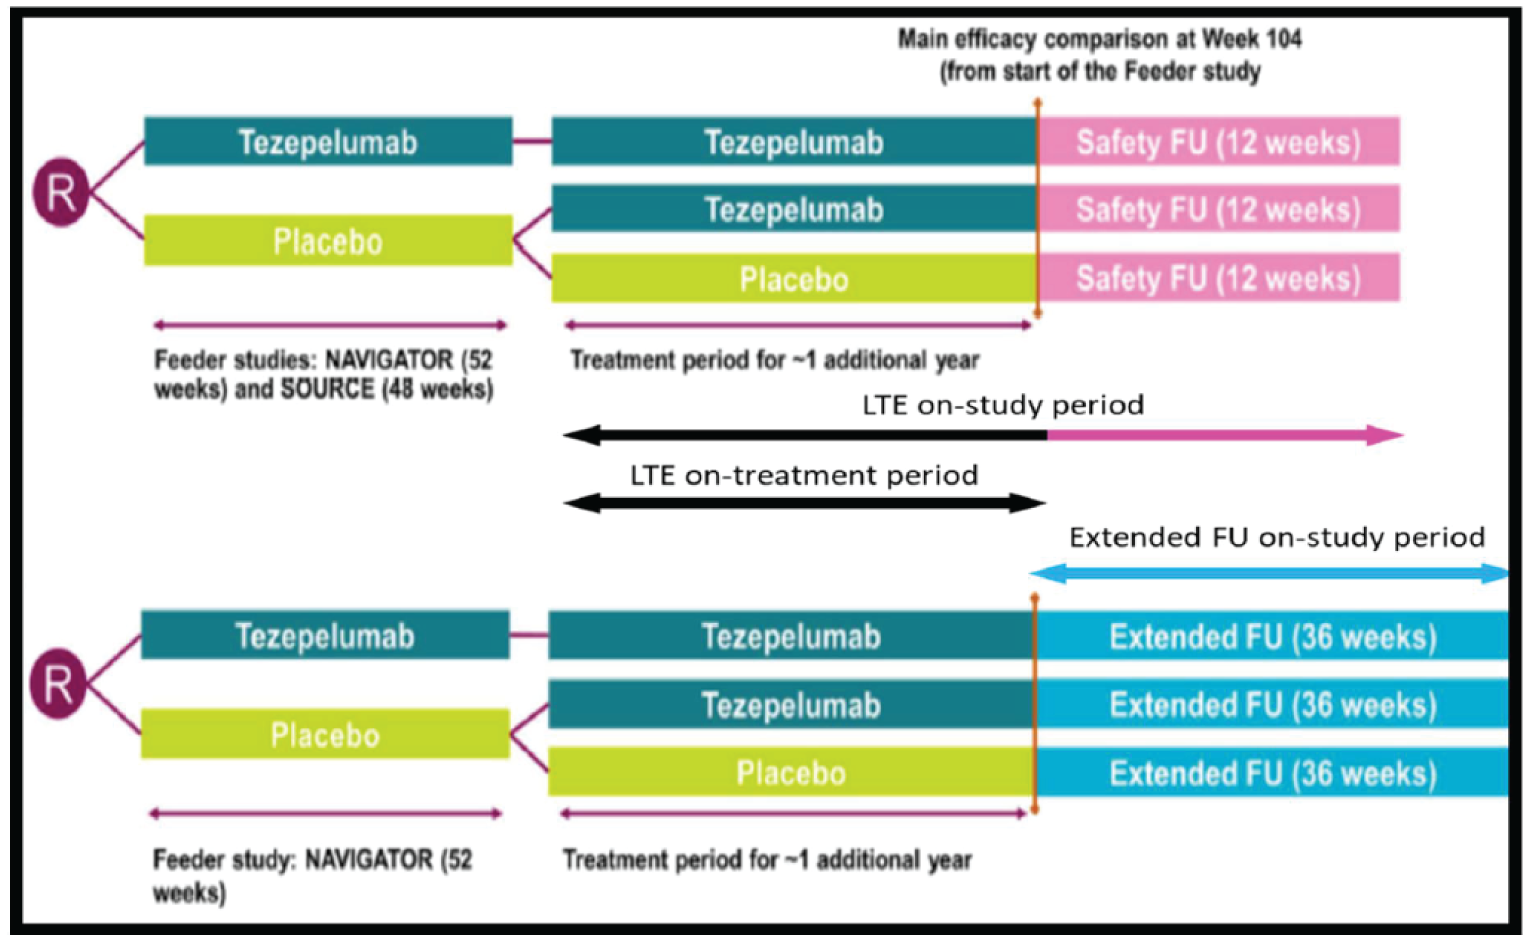 Patients were eligible to enter the LTE after completing the 52-week NAVIGATOR or 48-week SOURCE studies. Patients who received tezepelumab in either NAVIGATOR or SOURCE trials continued on tezepelumab during the LTE period. Patients who received placebo in either the NAVIGATOR or SOURCE study were re-randomized to either tezepelumab or placebo. The LTE study consisted of a 1-year treatment period, followed by a 12-week safety follow-up. Some patients who entered the LTE from the NAVIGATOR study were also eligible for an extended follow-up of 36 weeks after completion of the treatment period.